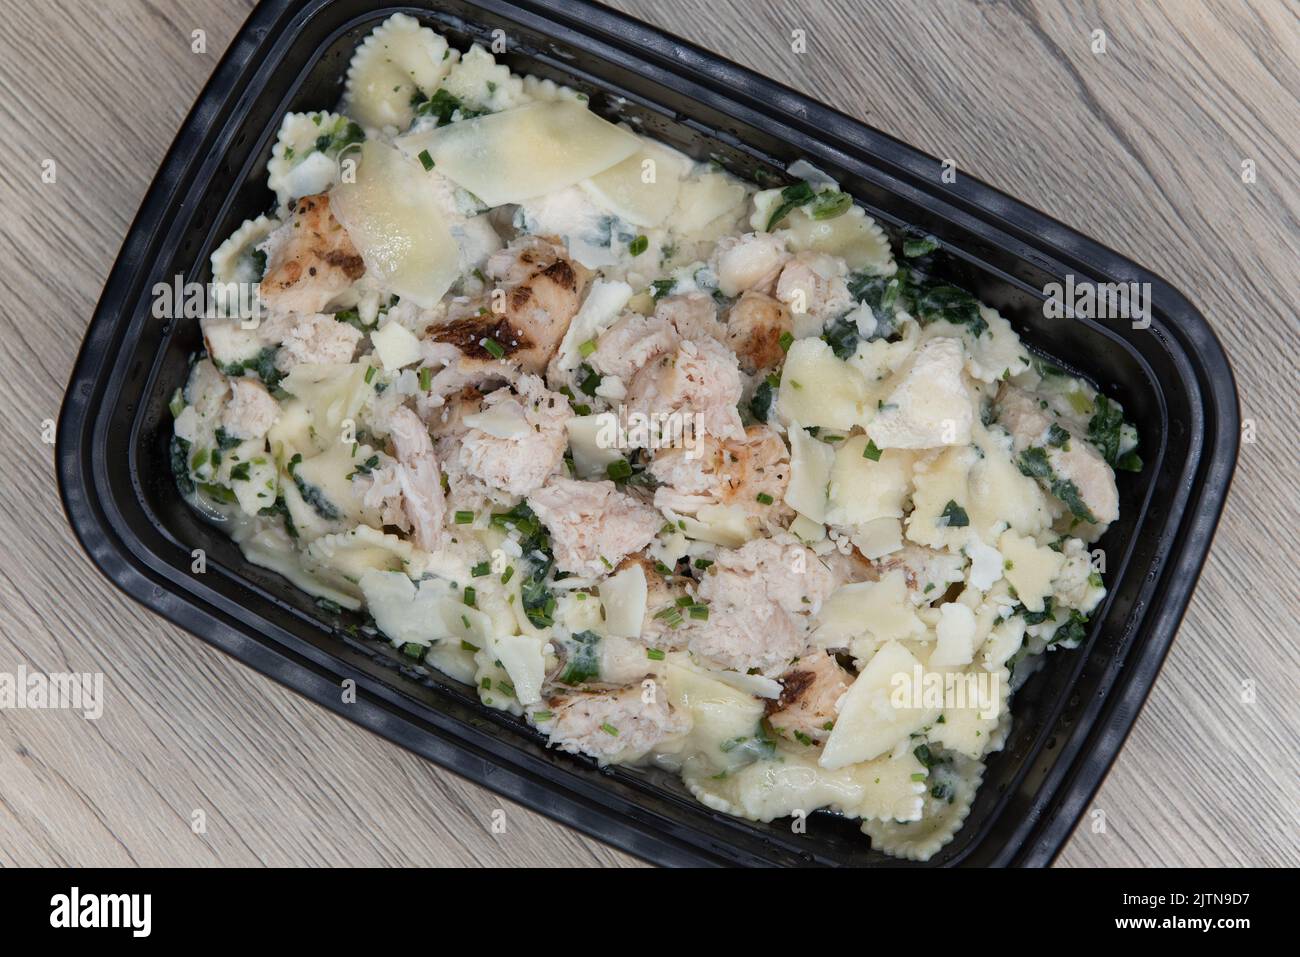 Overhead view of take out order of chicken with bow tie pasta is conveniently packed in a microwavable container. Stock Photo